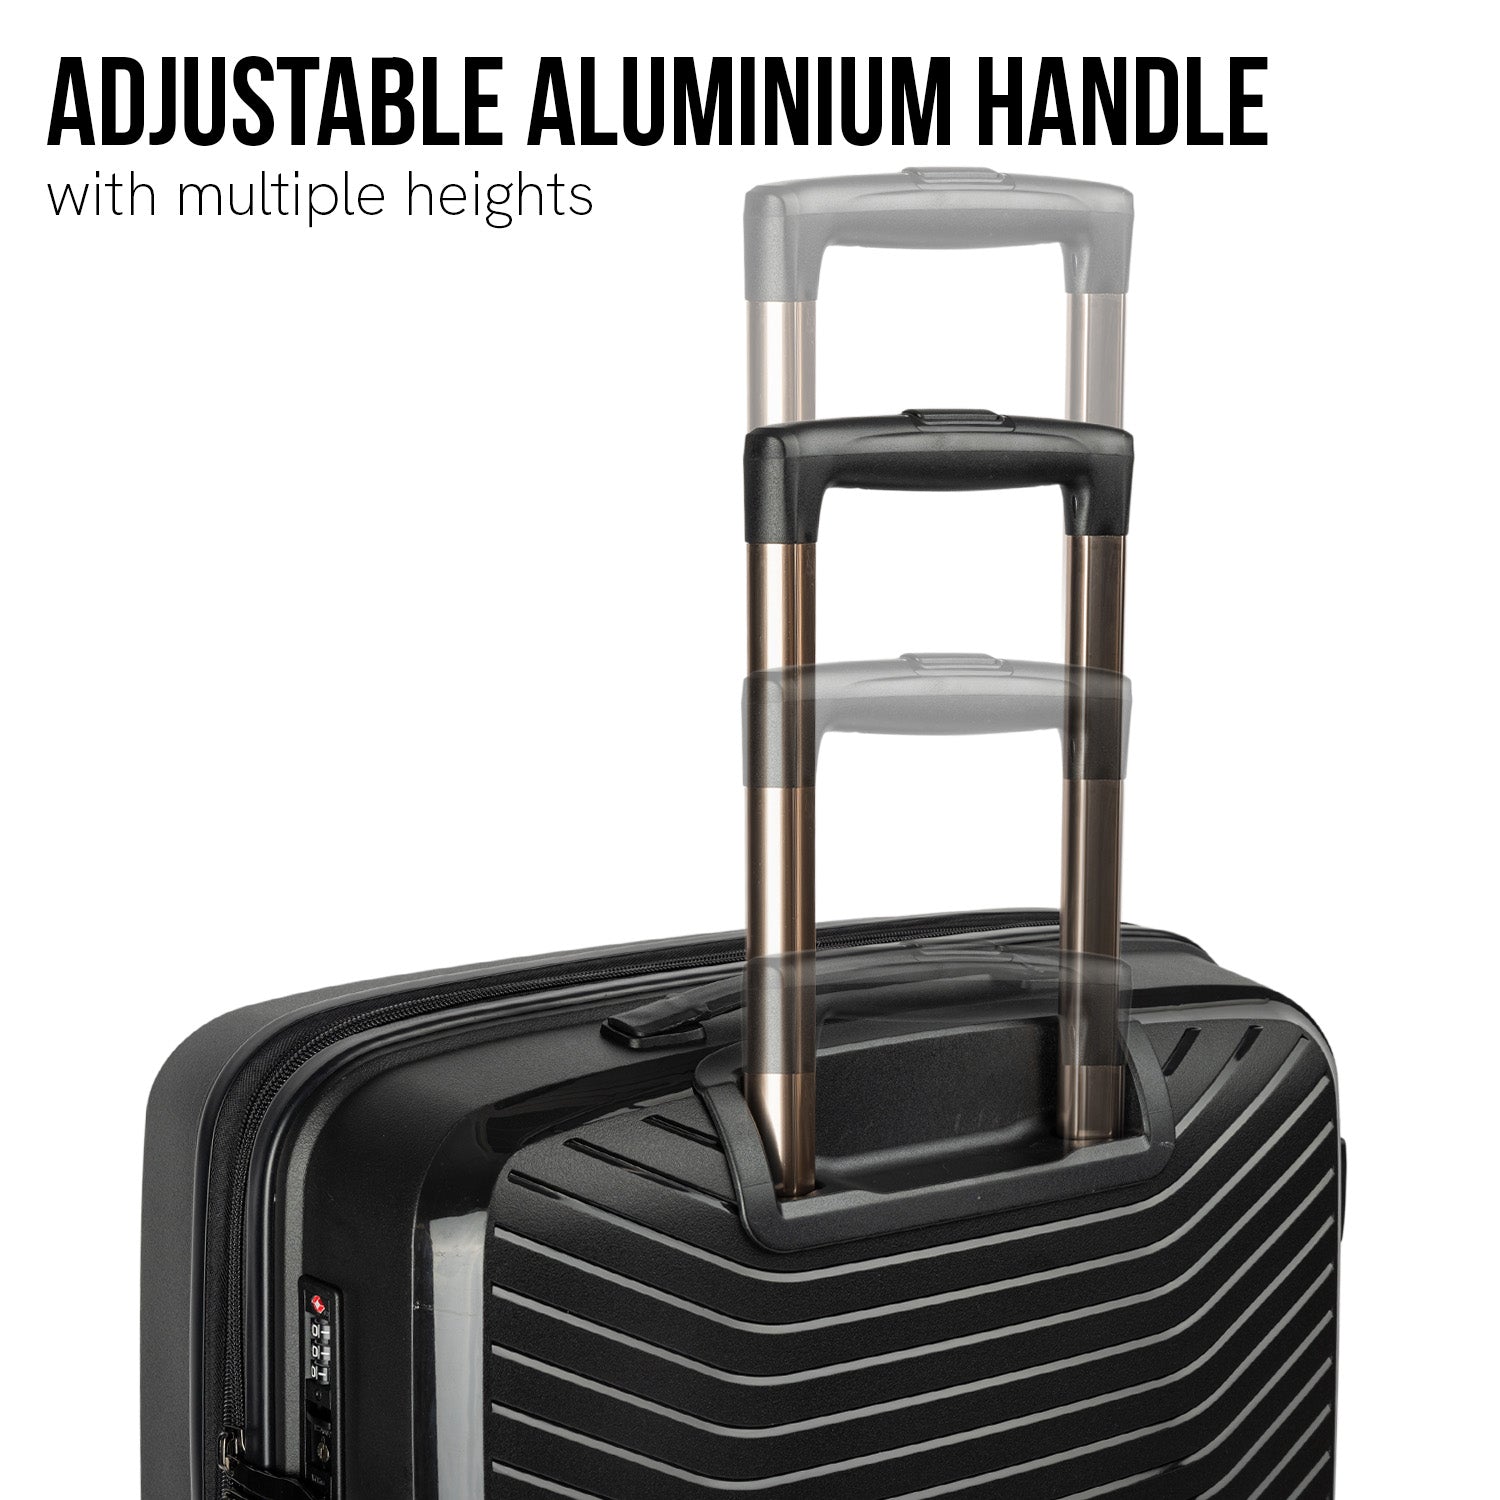 Astra 29in Lightweight Hard Shell Suitcase - Obsidian Black